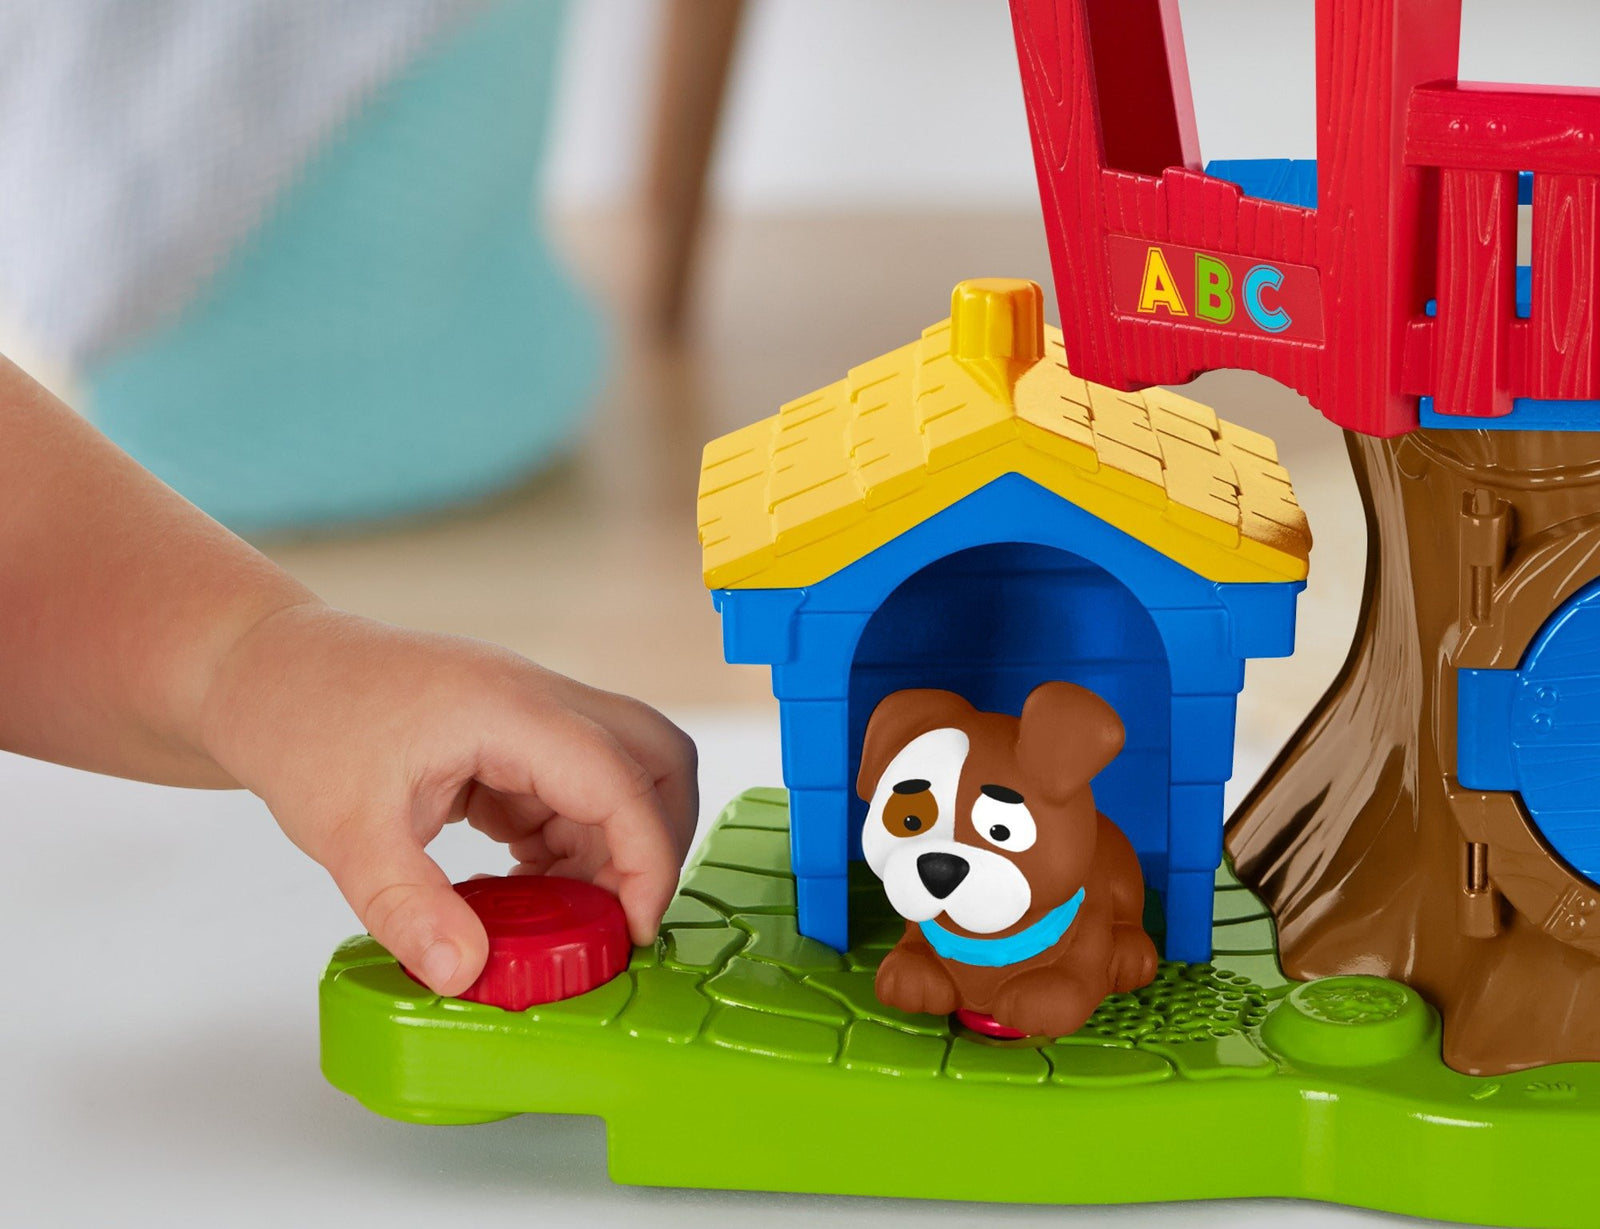 Fisher-Price Little People Swing & Share Treehouse [Amazon Exclusive]